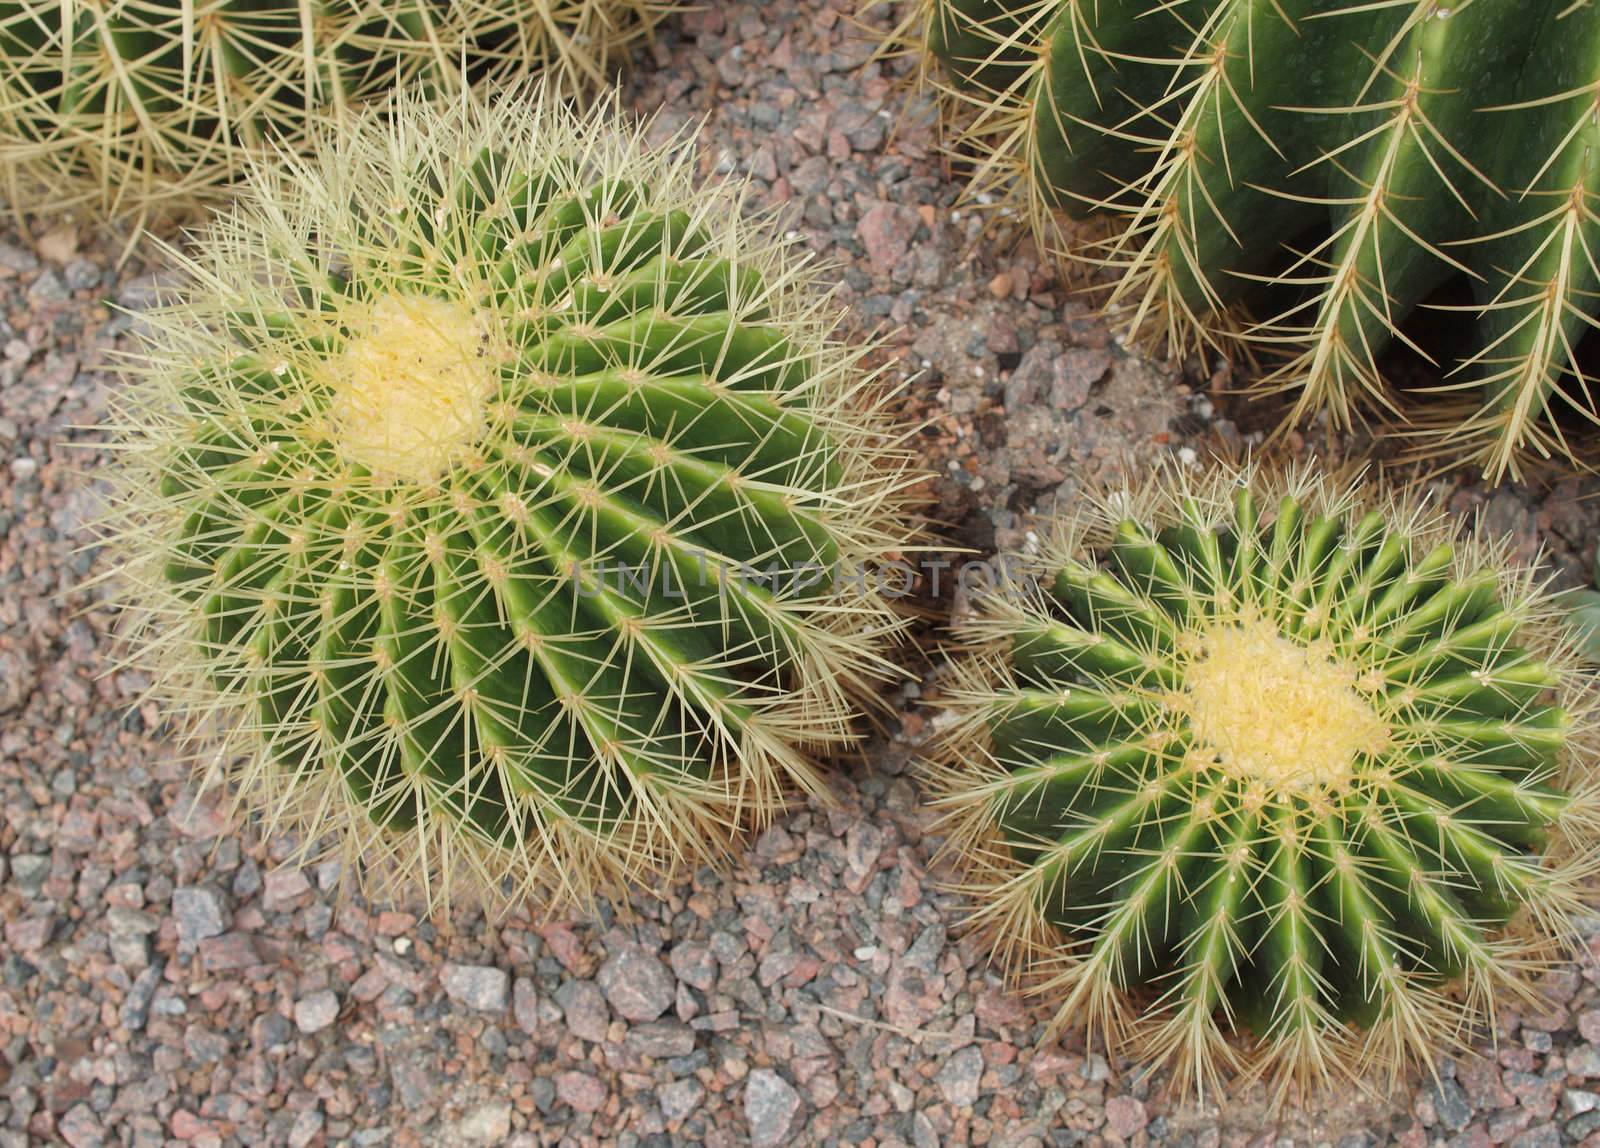 cactus by Ric510